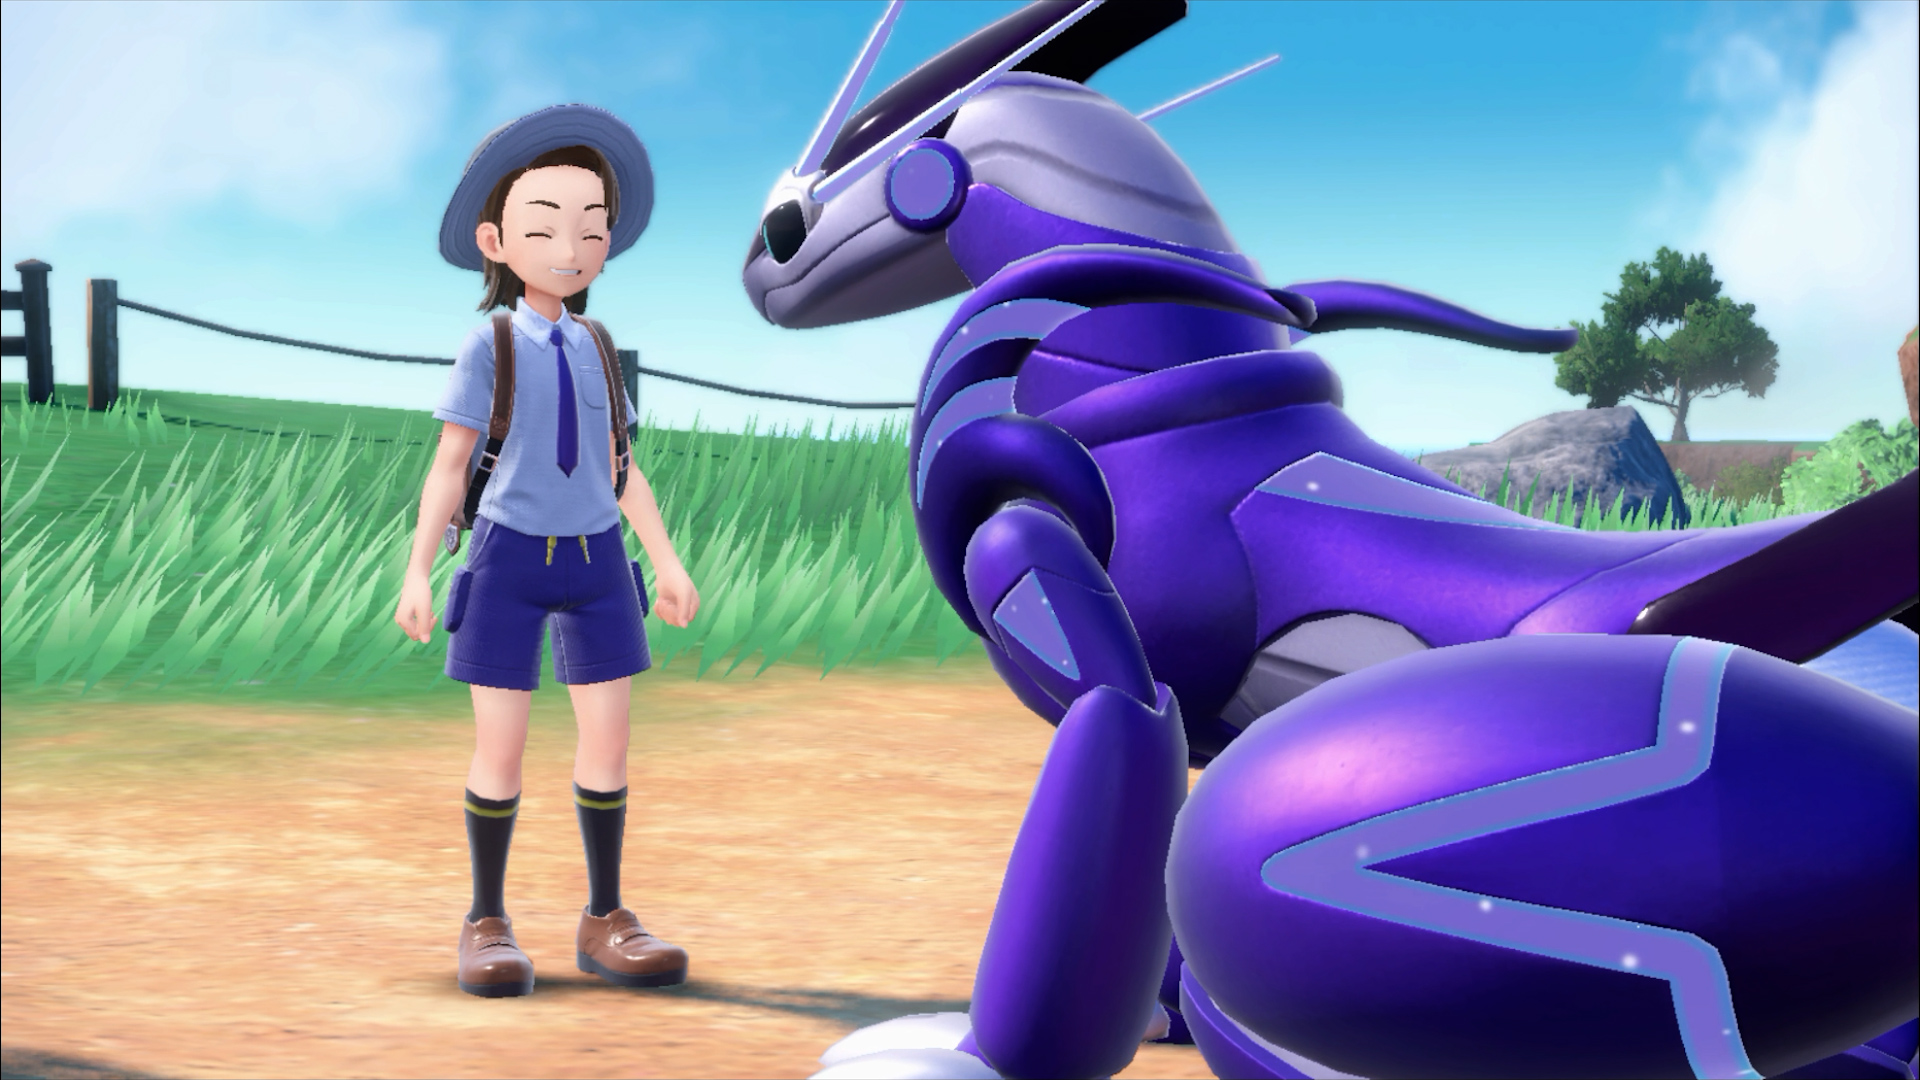 Pokémon Sword and Shield guide: Special evolution methods and requirements  - Polygon